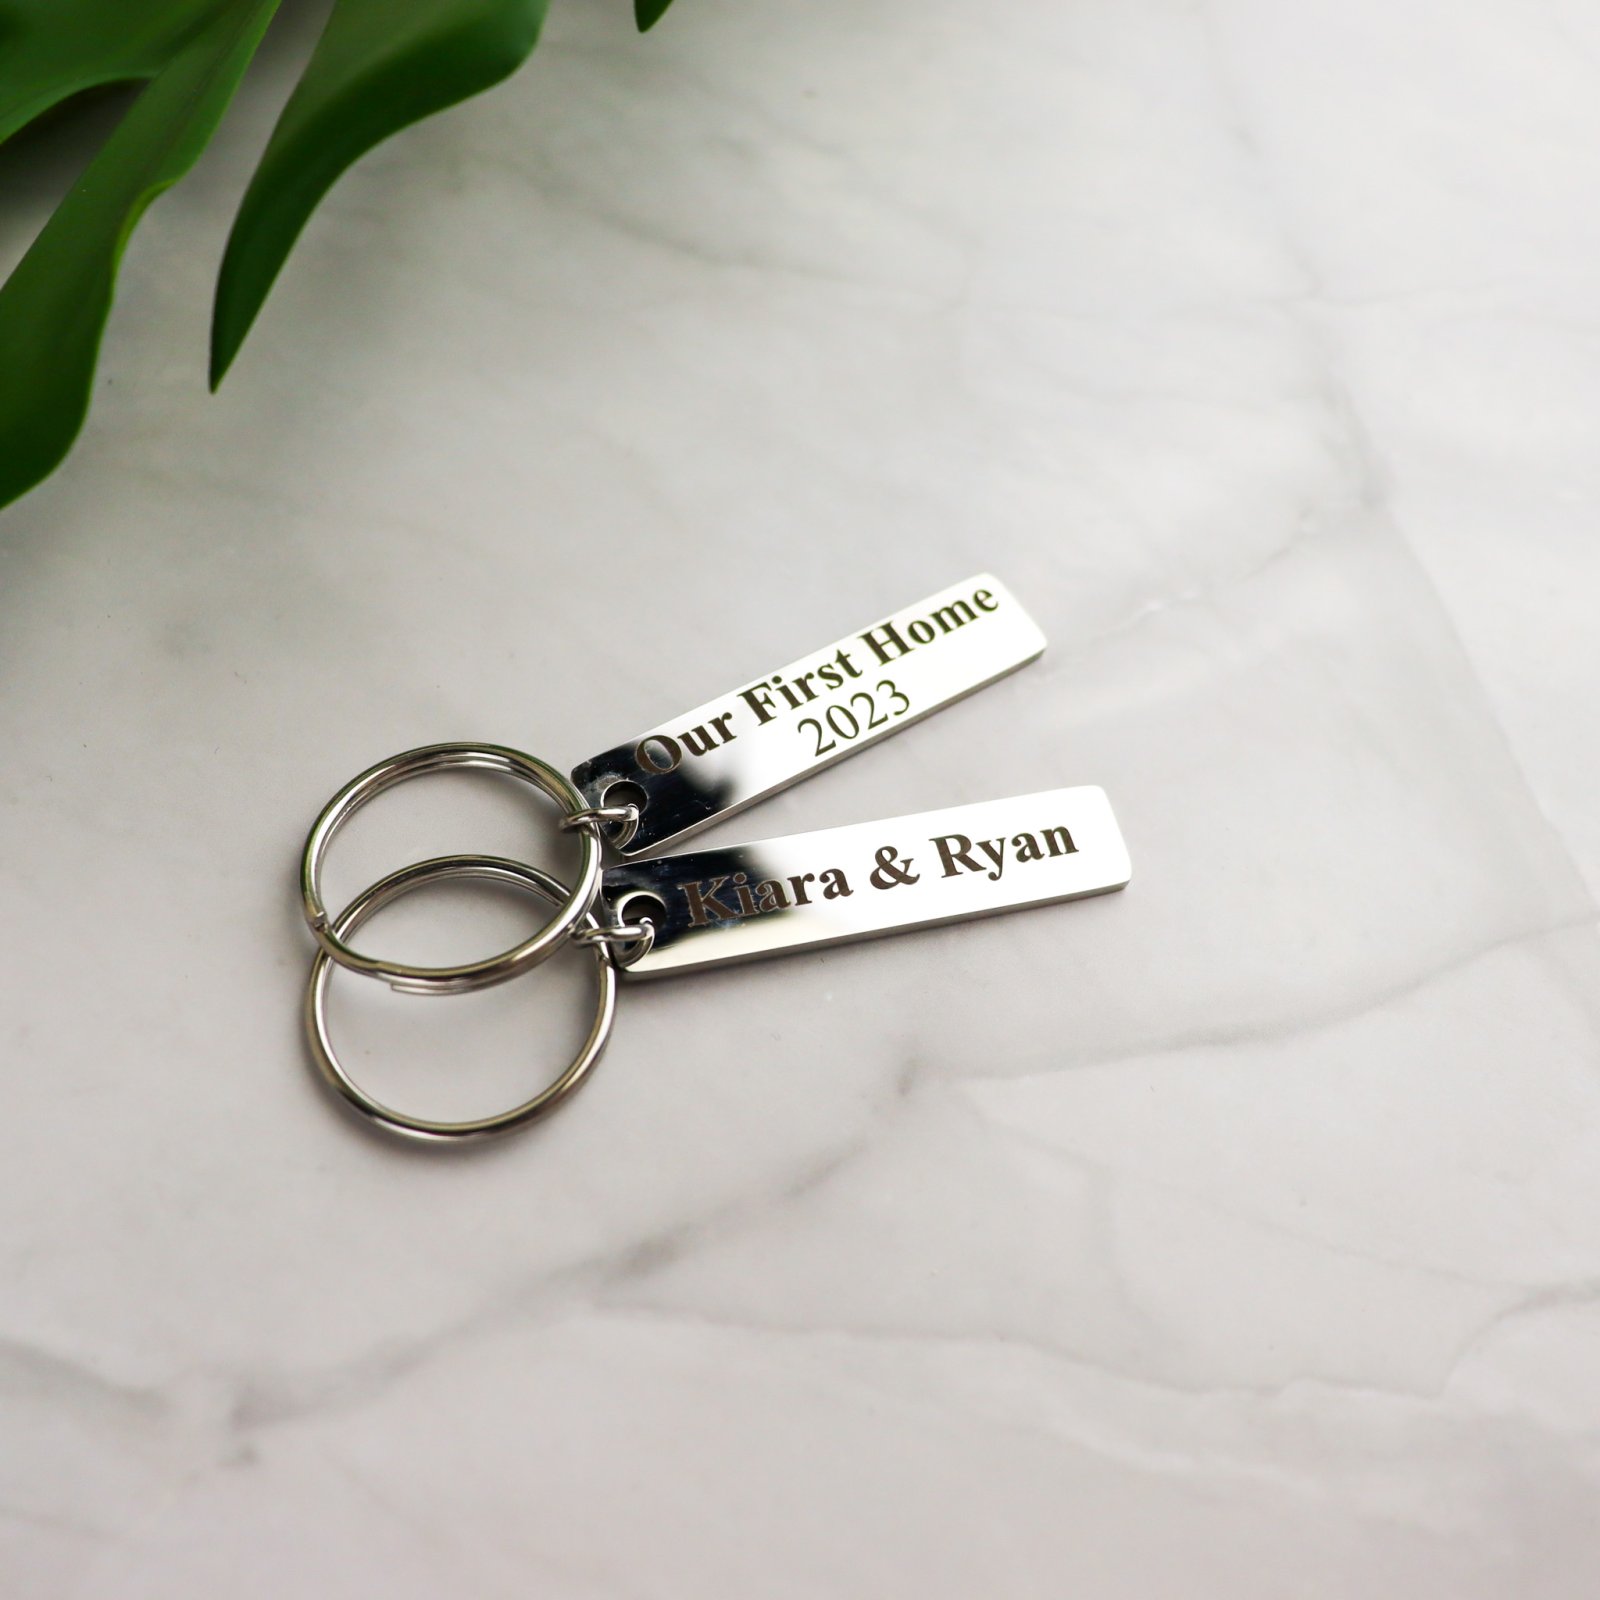 Our first home metal bar keyring